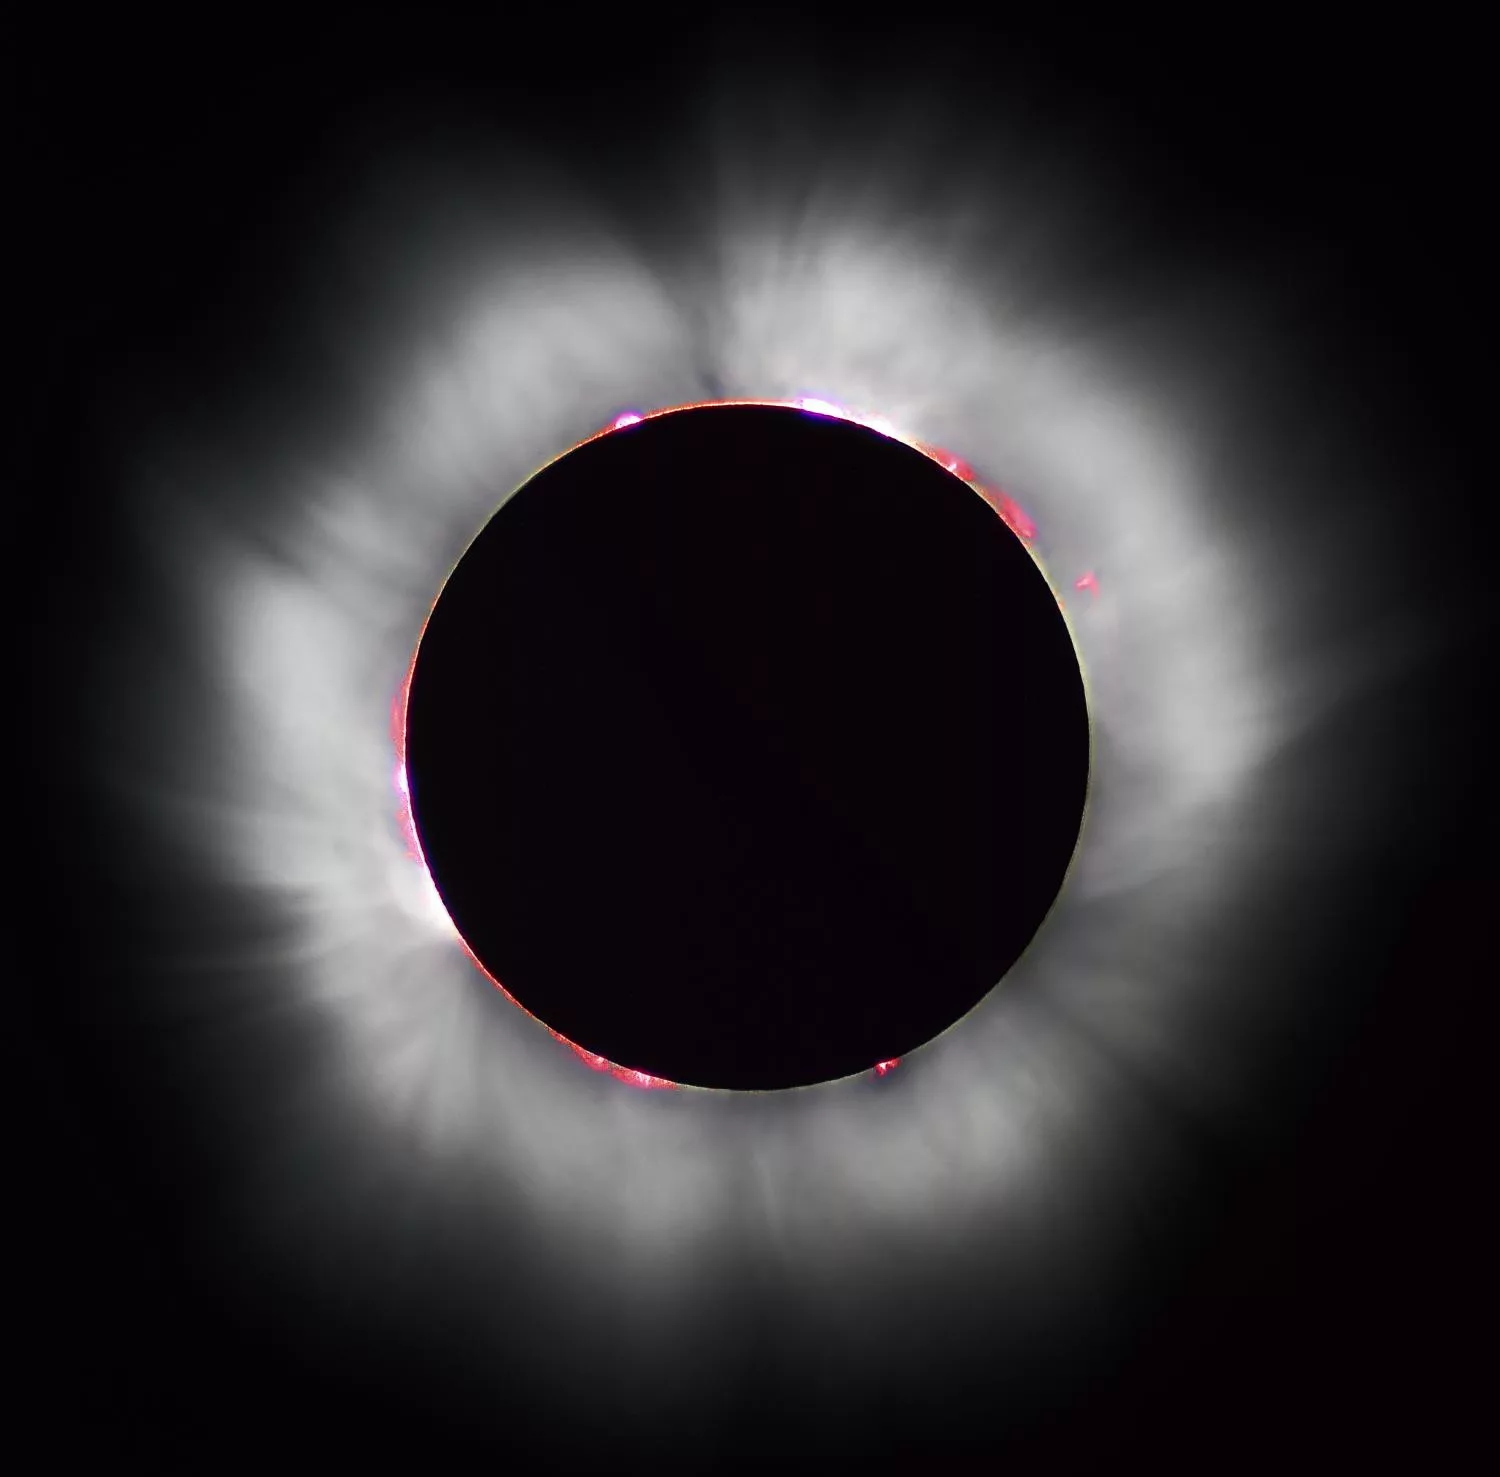 Schools in the path of April's total solar eclipse prepare for a natural teaching moment